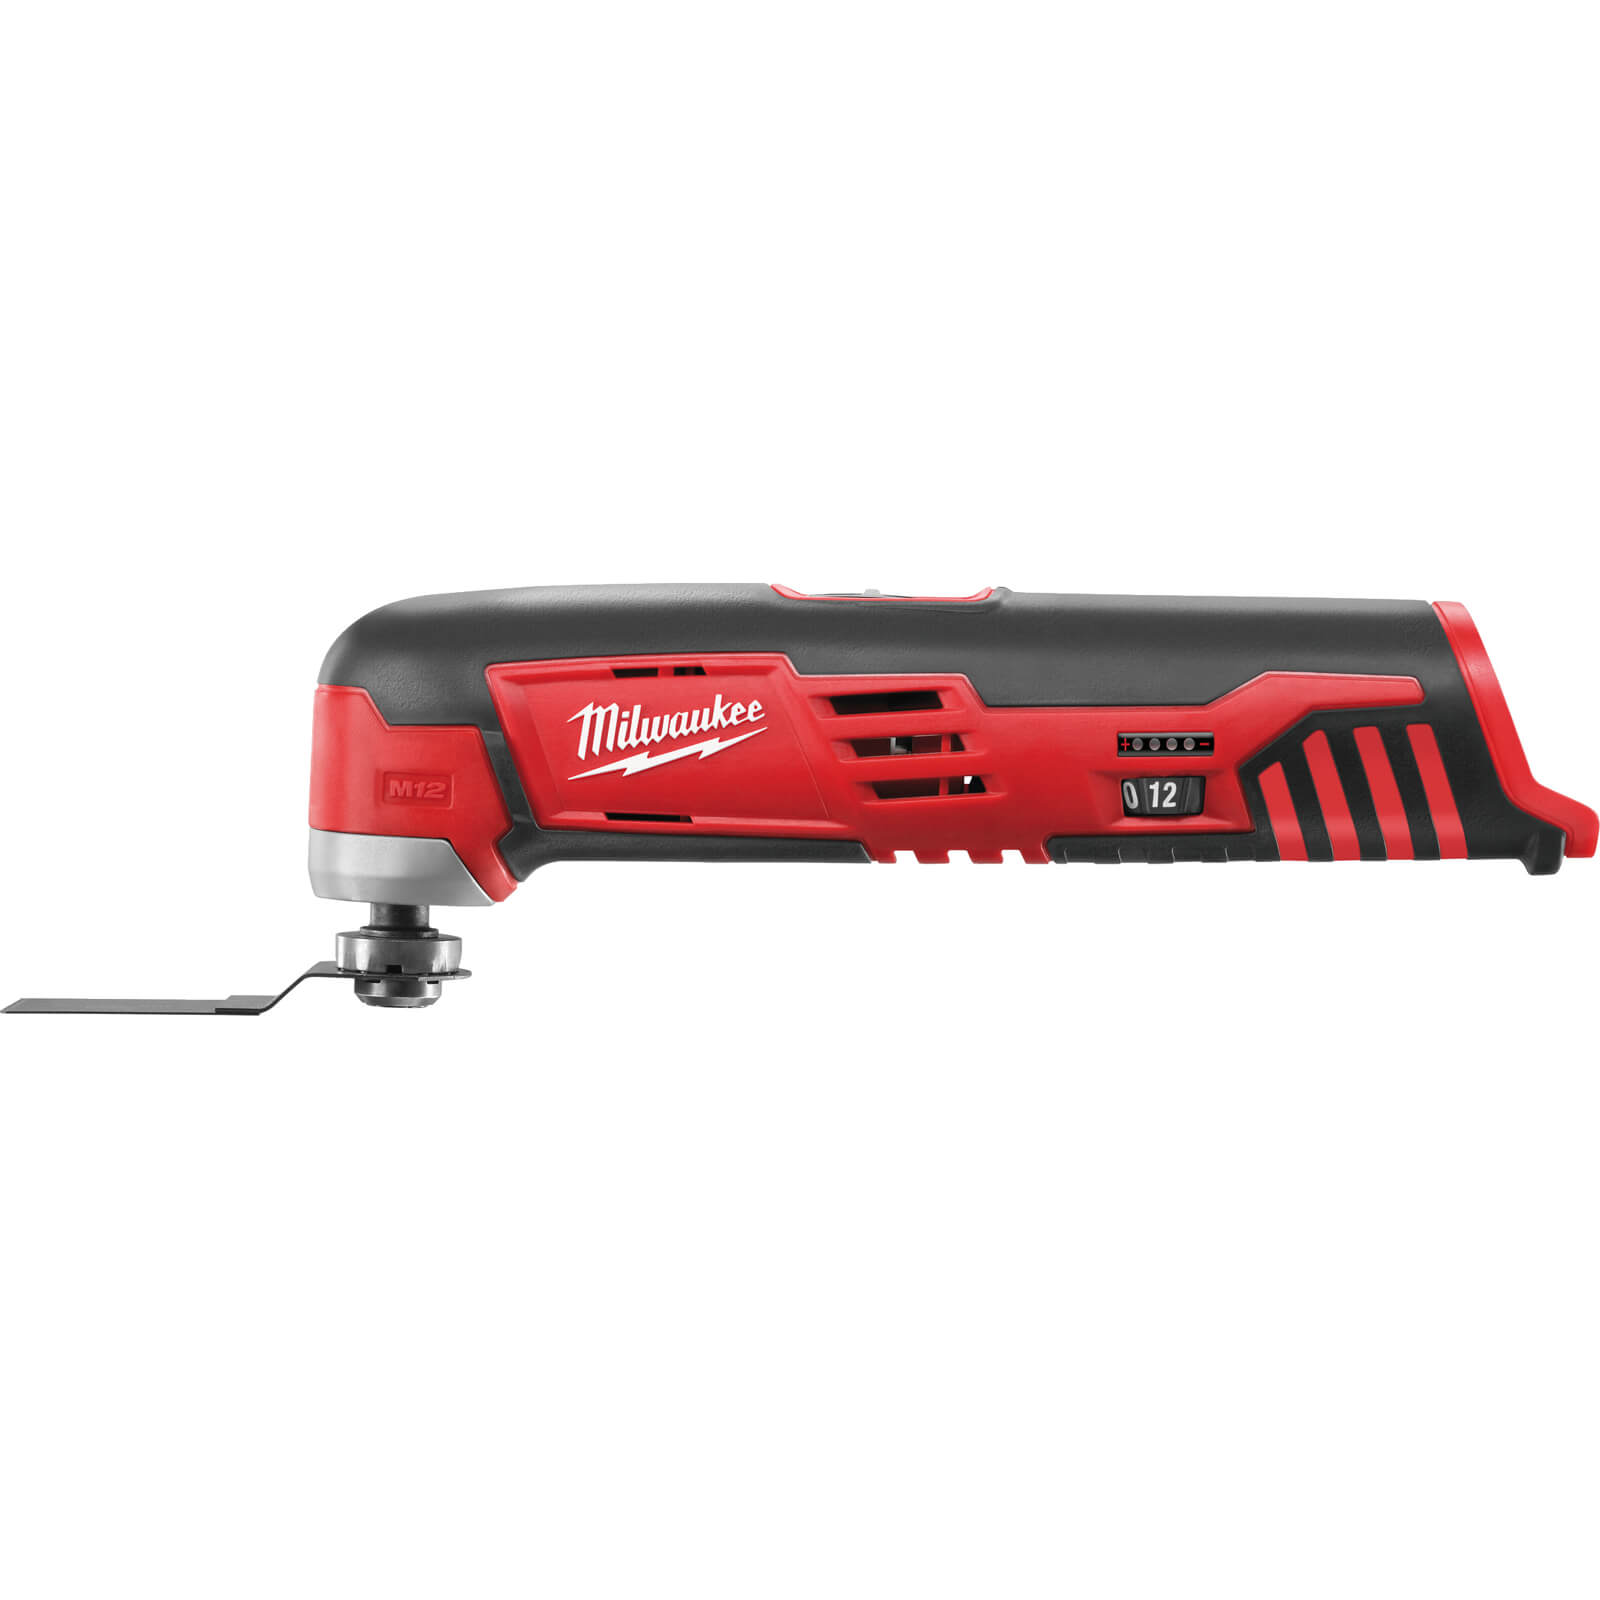 Image of Milwaukee C12 MT 12v Cordless Compact Multi Tool No Batteries No Charger No Case